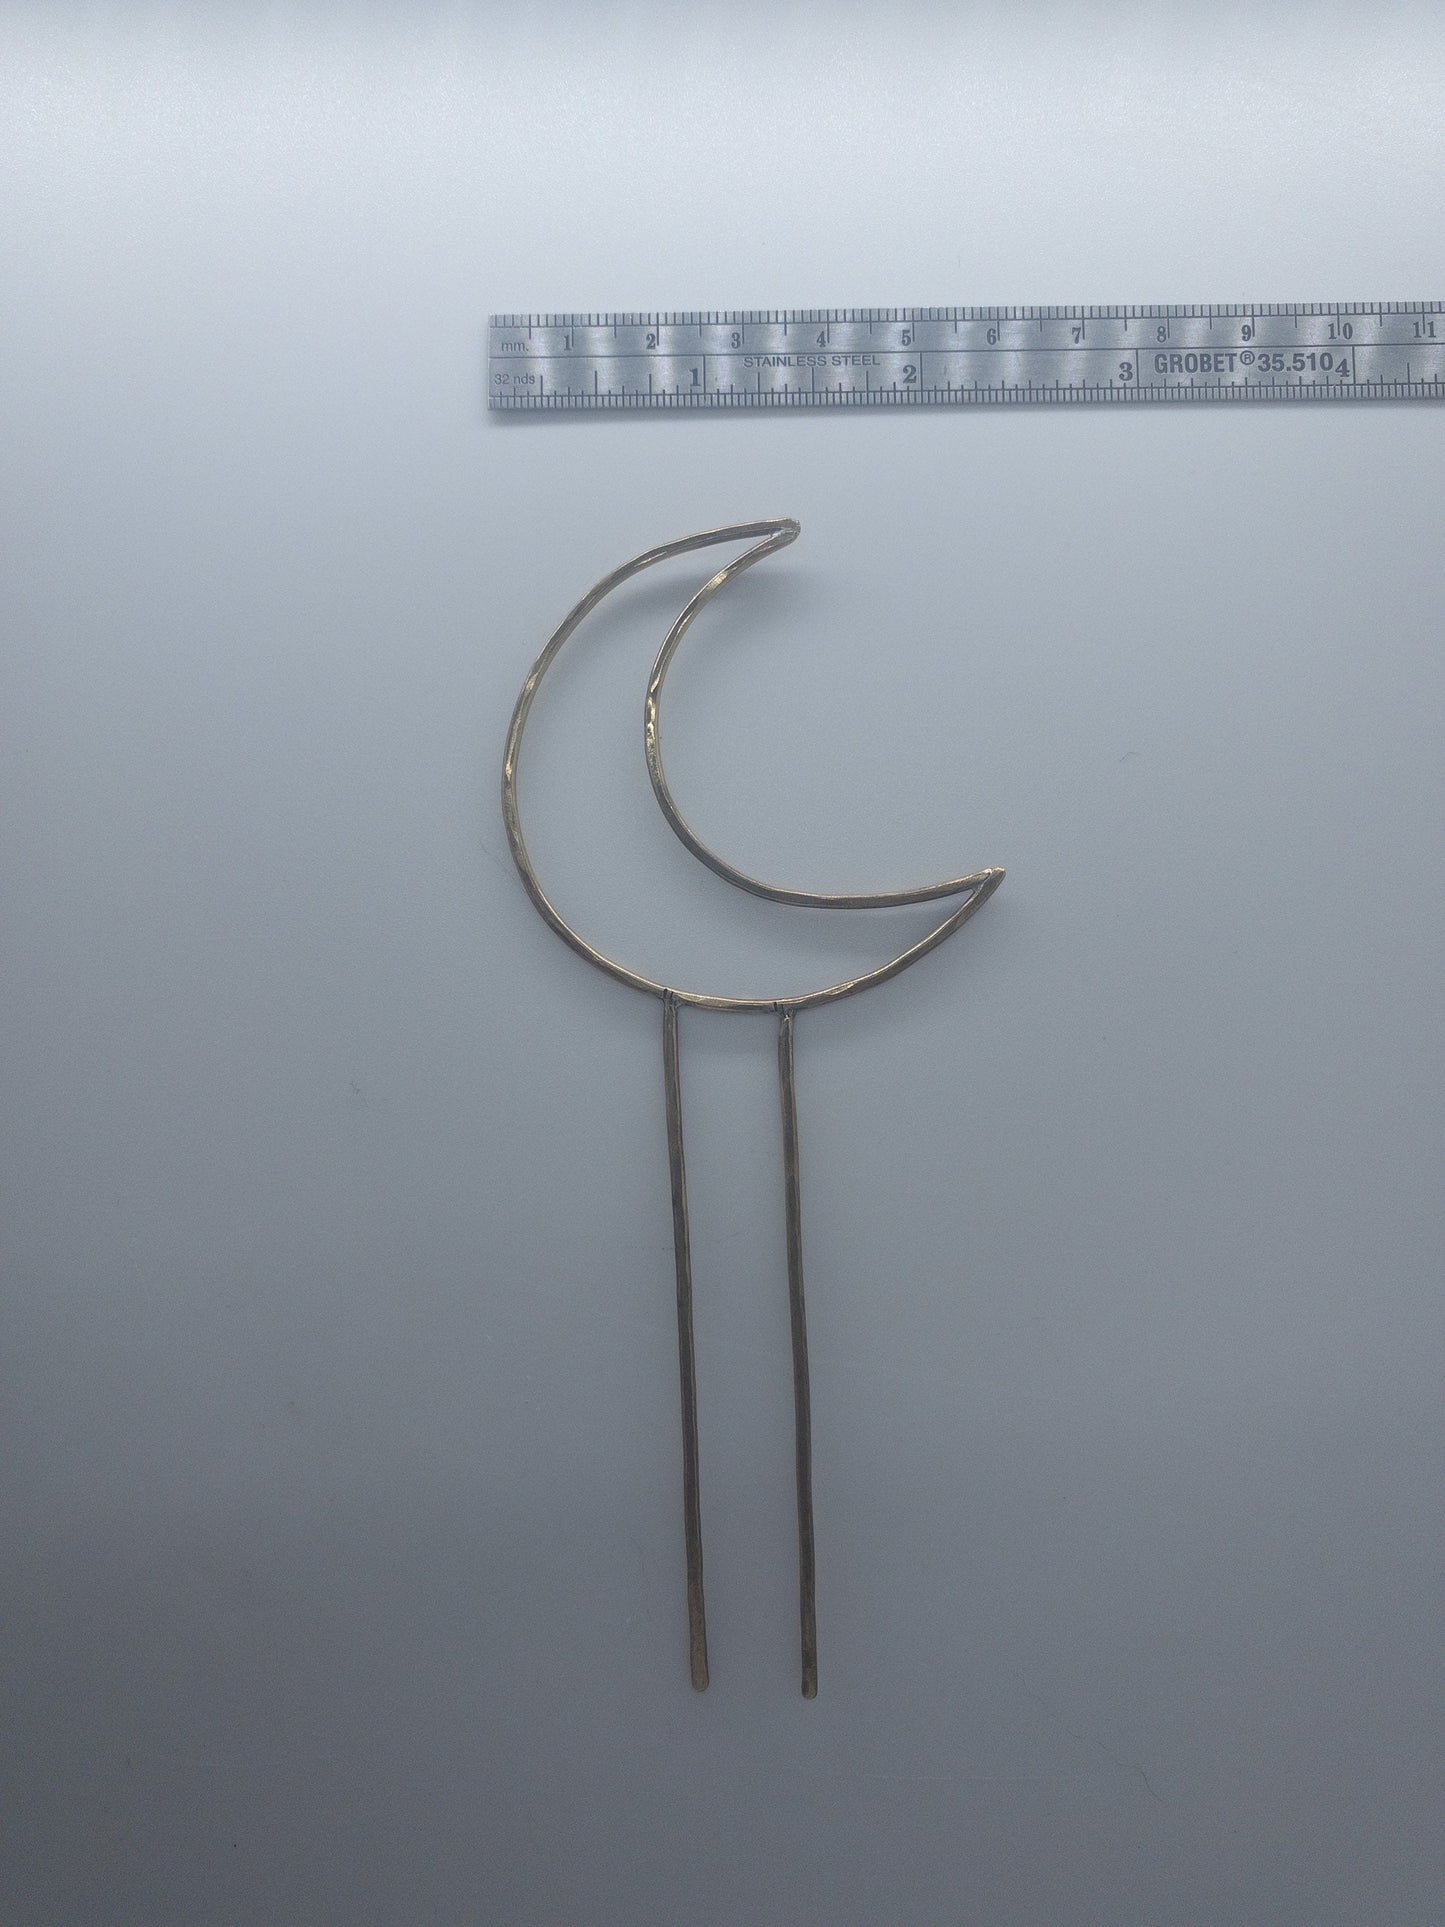 Brass Moon Plant Fork, Moon Plant Accessory, Crescent Moon Decor, Indoor Plant Decor, Moon Hairpin, Plant Stake, Jewelry for Plants, Stake